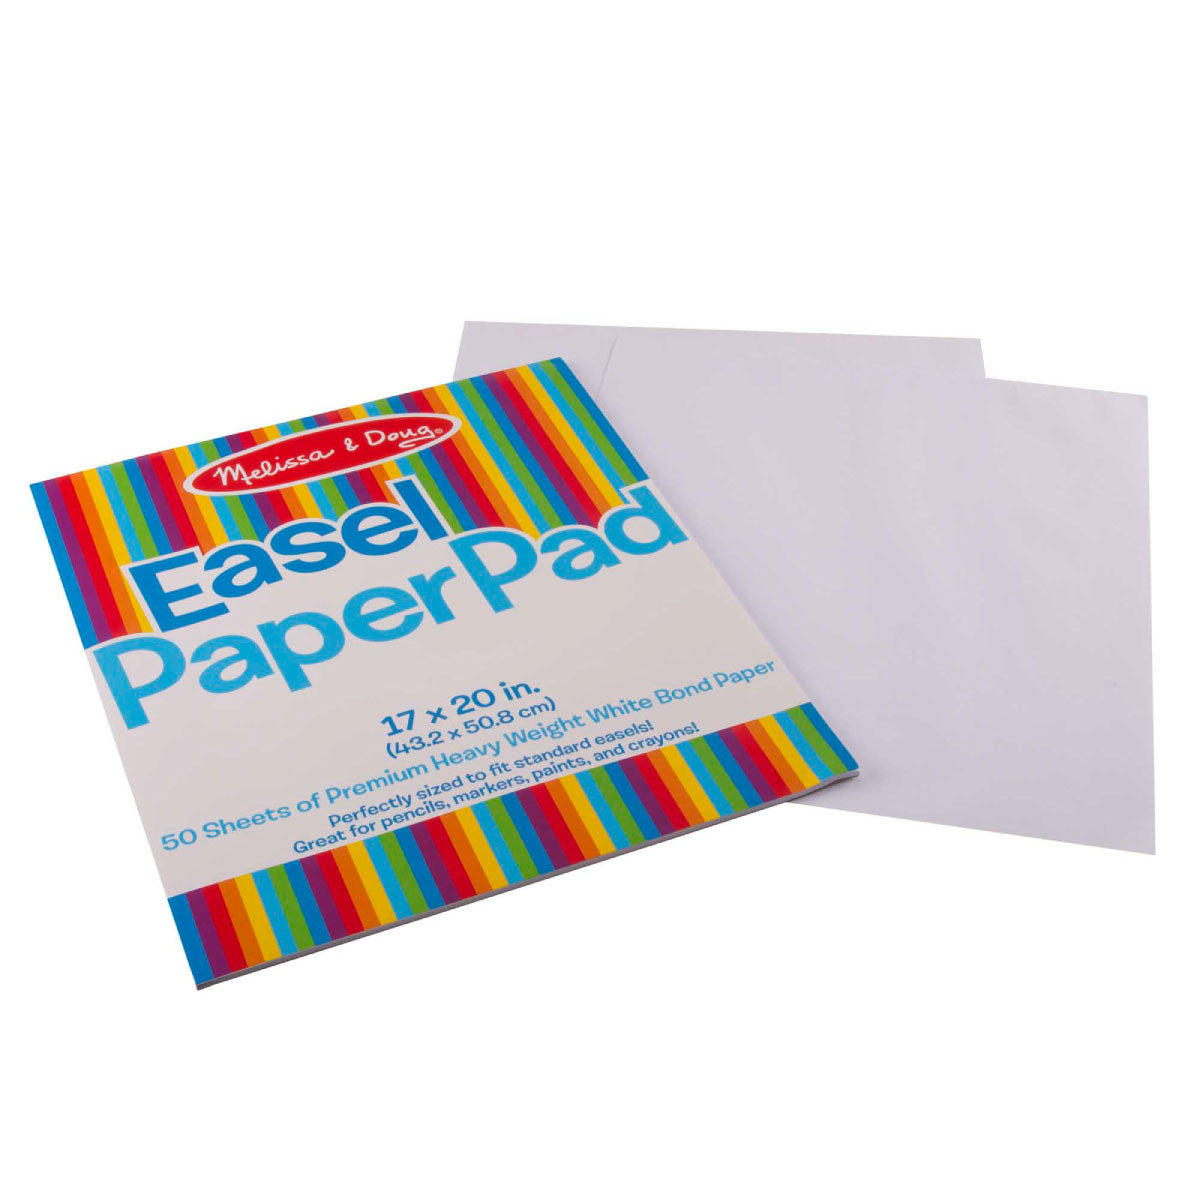 Easel Paper Pad - 17” x 20”